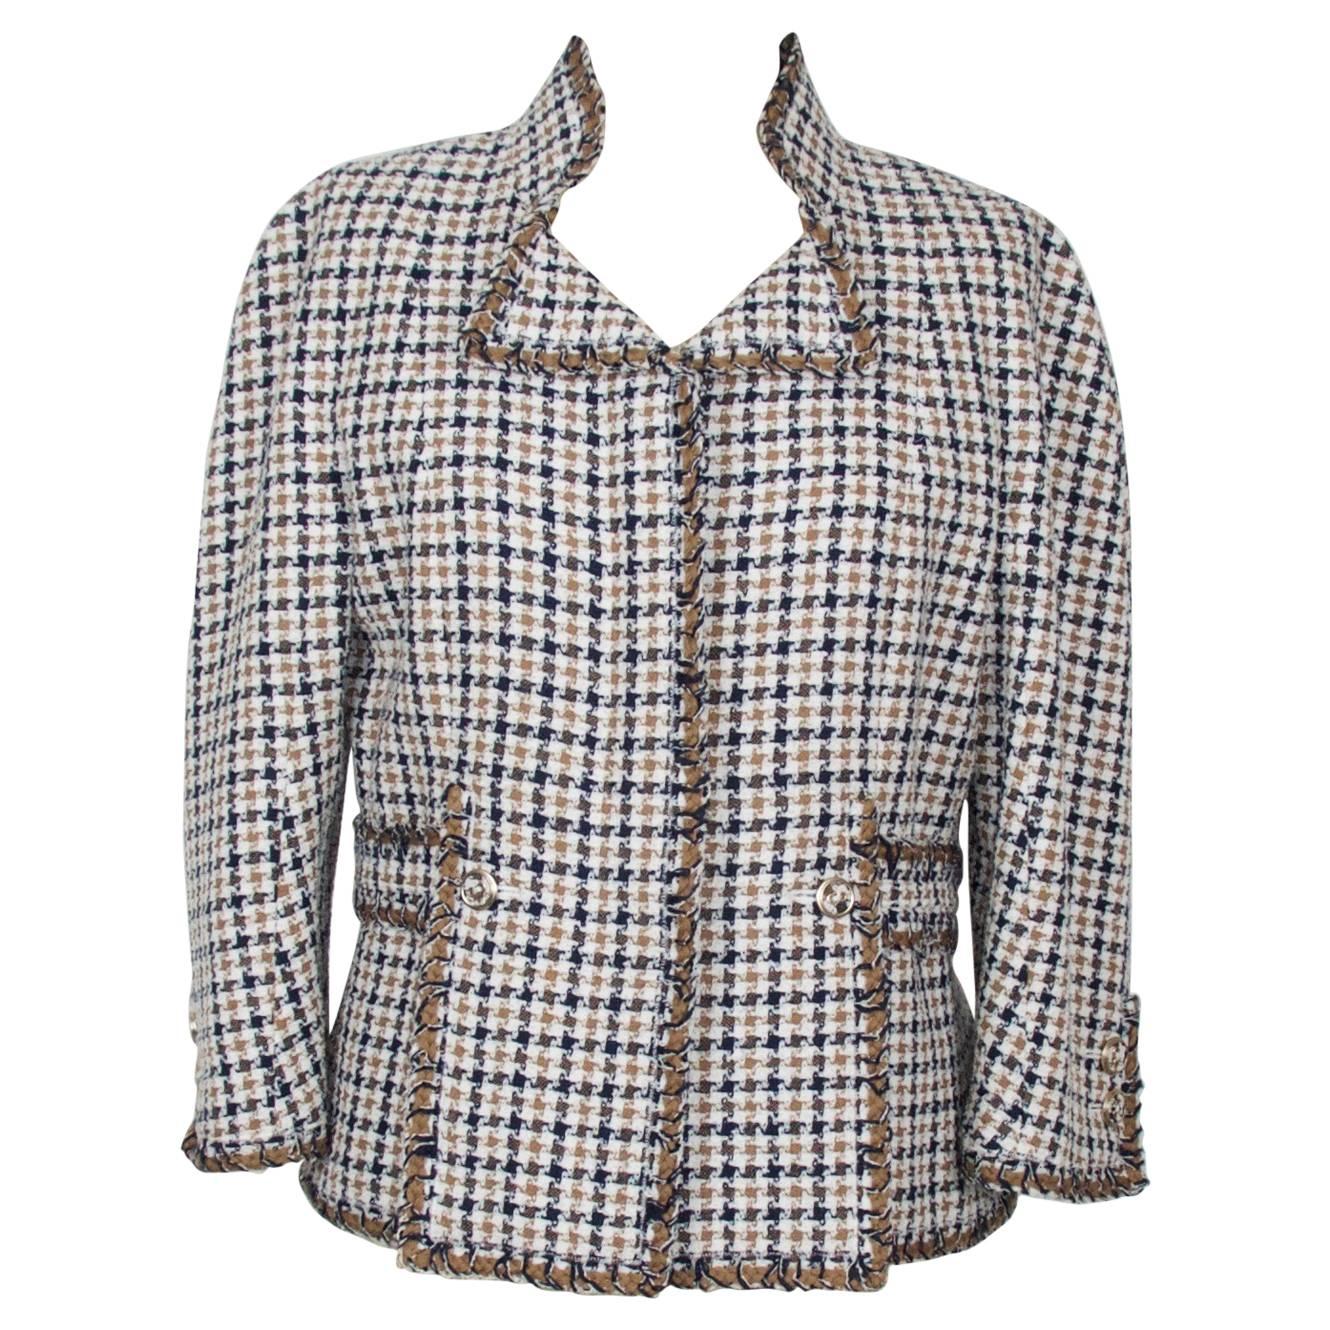 Chanel Boucle Jacket - navy, caramel, white and cream For Sale